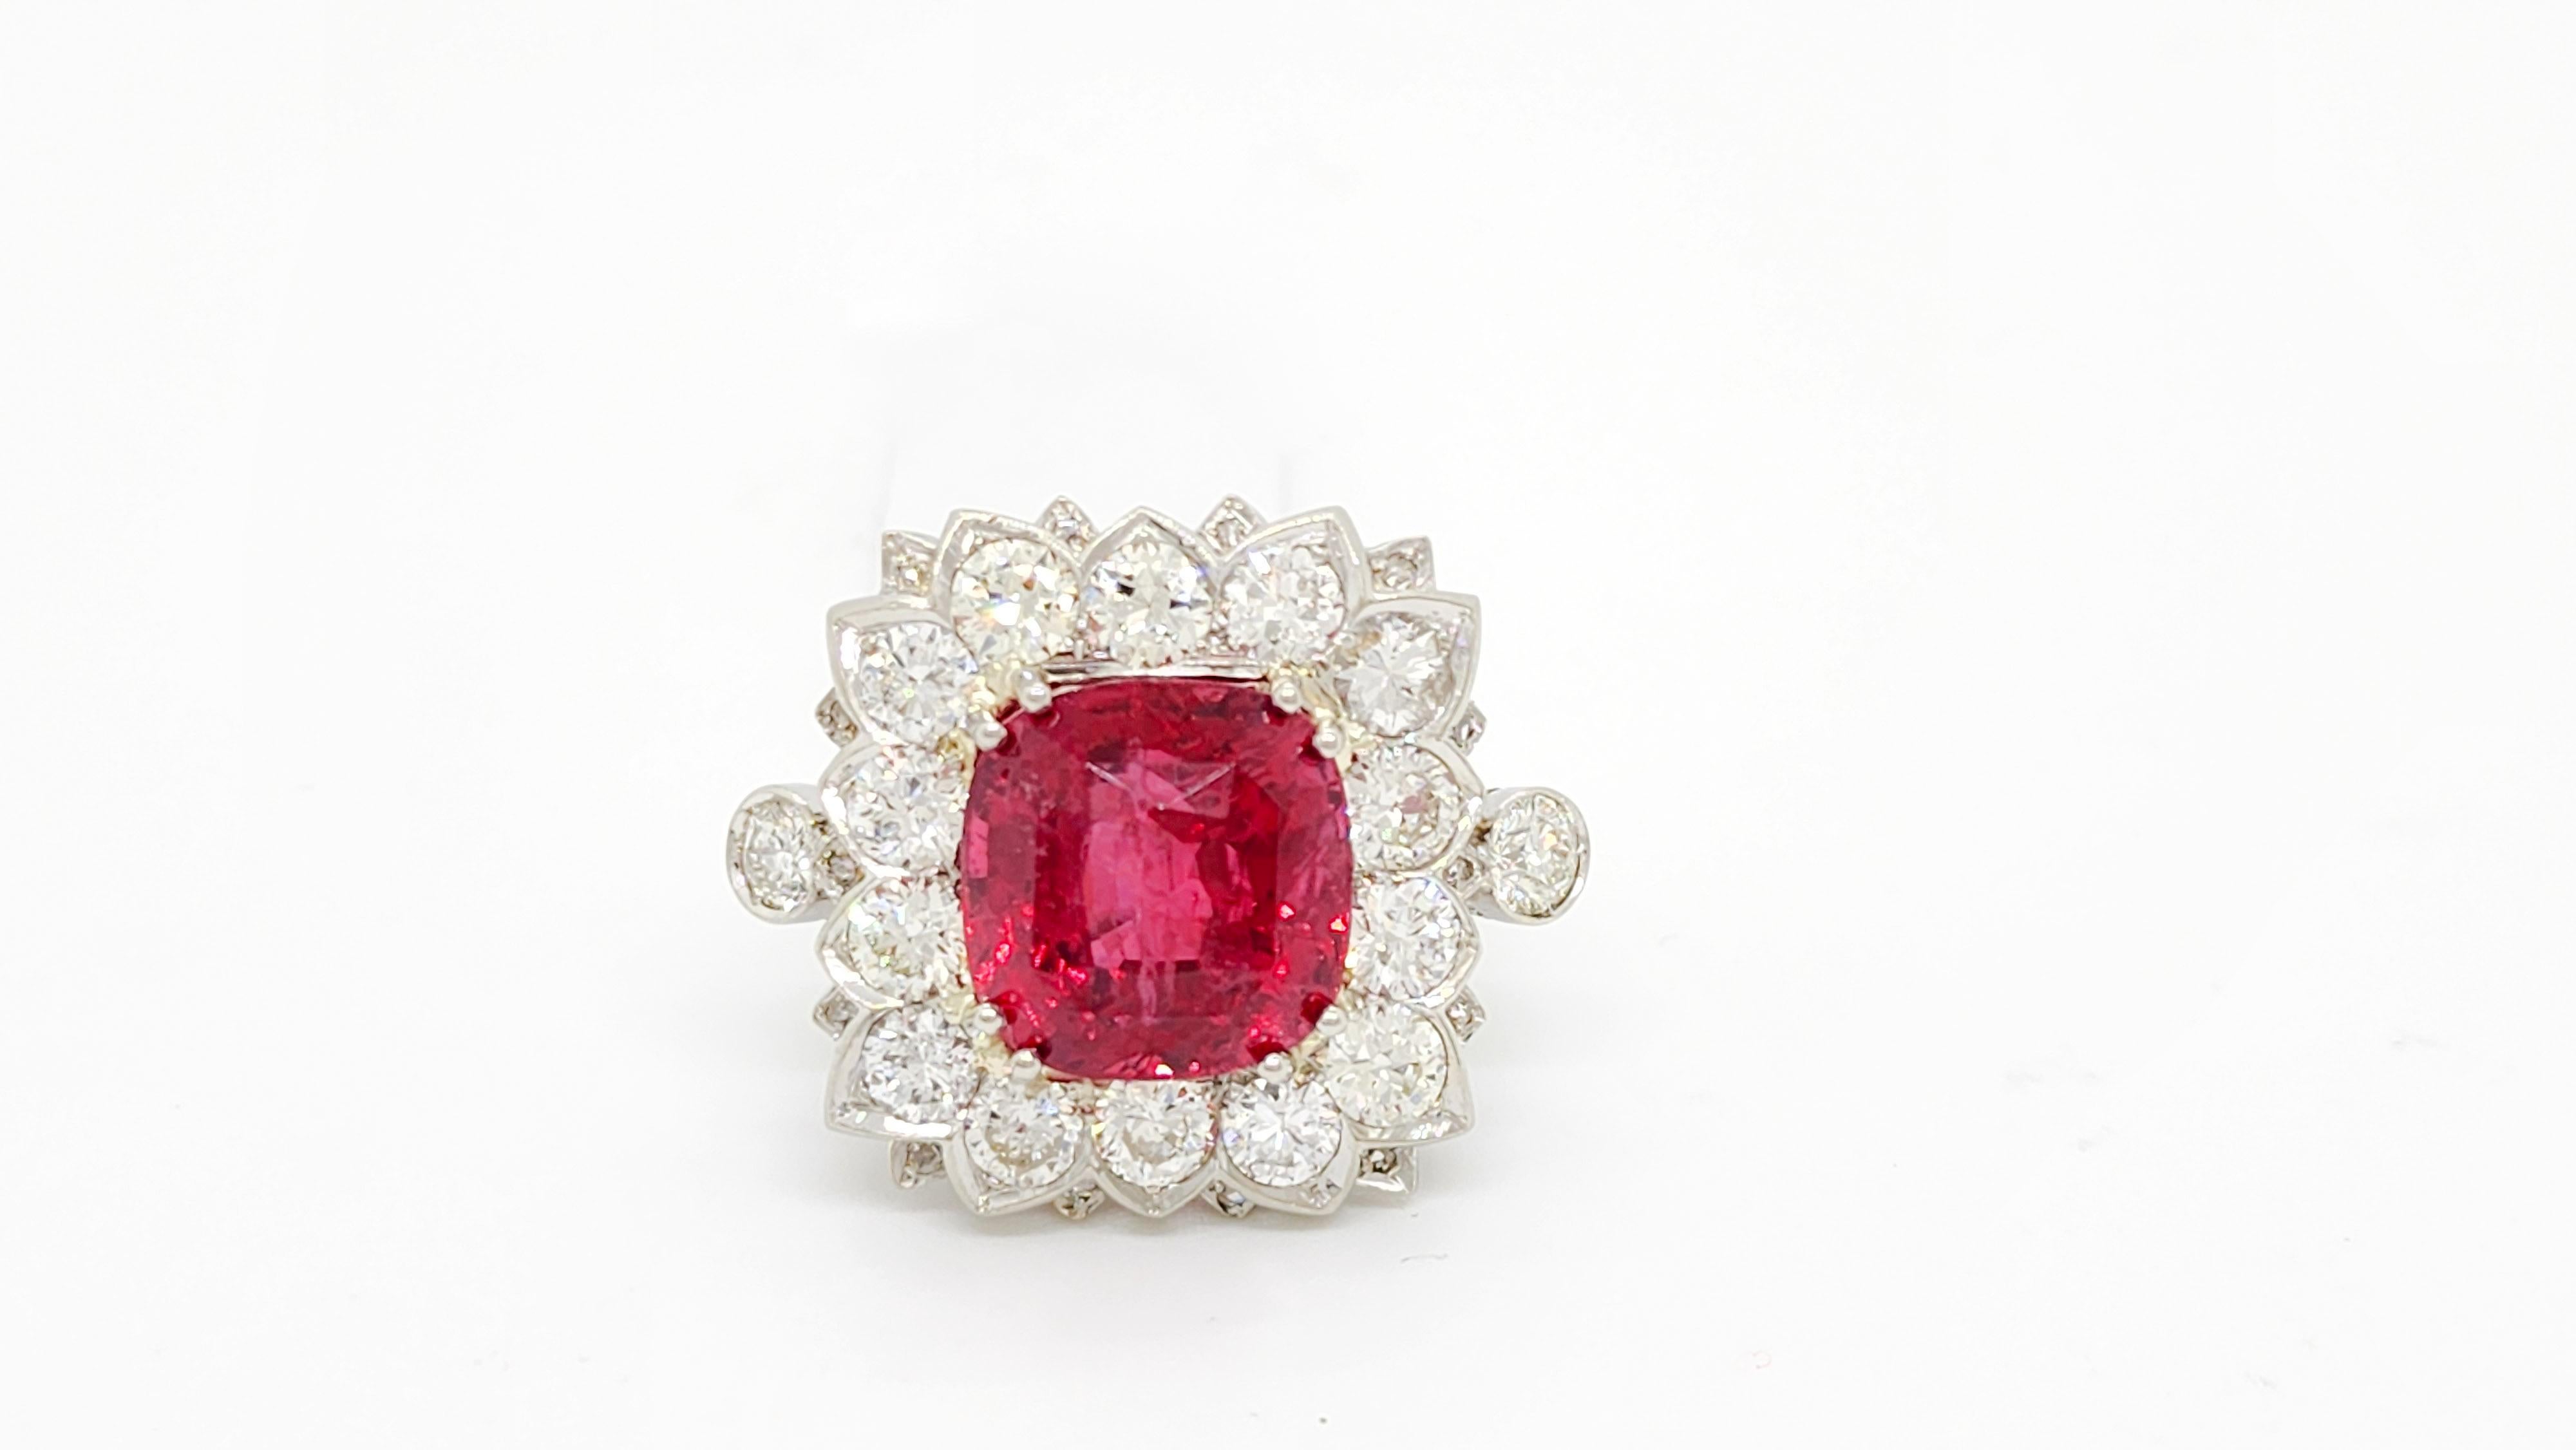 Gorgeous 11.09 ct. red spinel cushion with good quality white diamond rounds.  Handmade in 18k white gold.  Ring size 7.5. GIA certificate included.